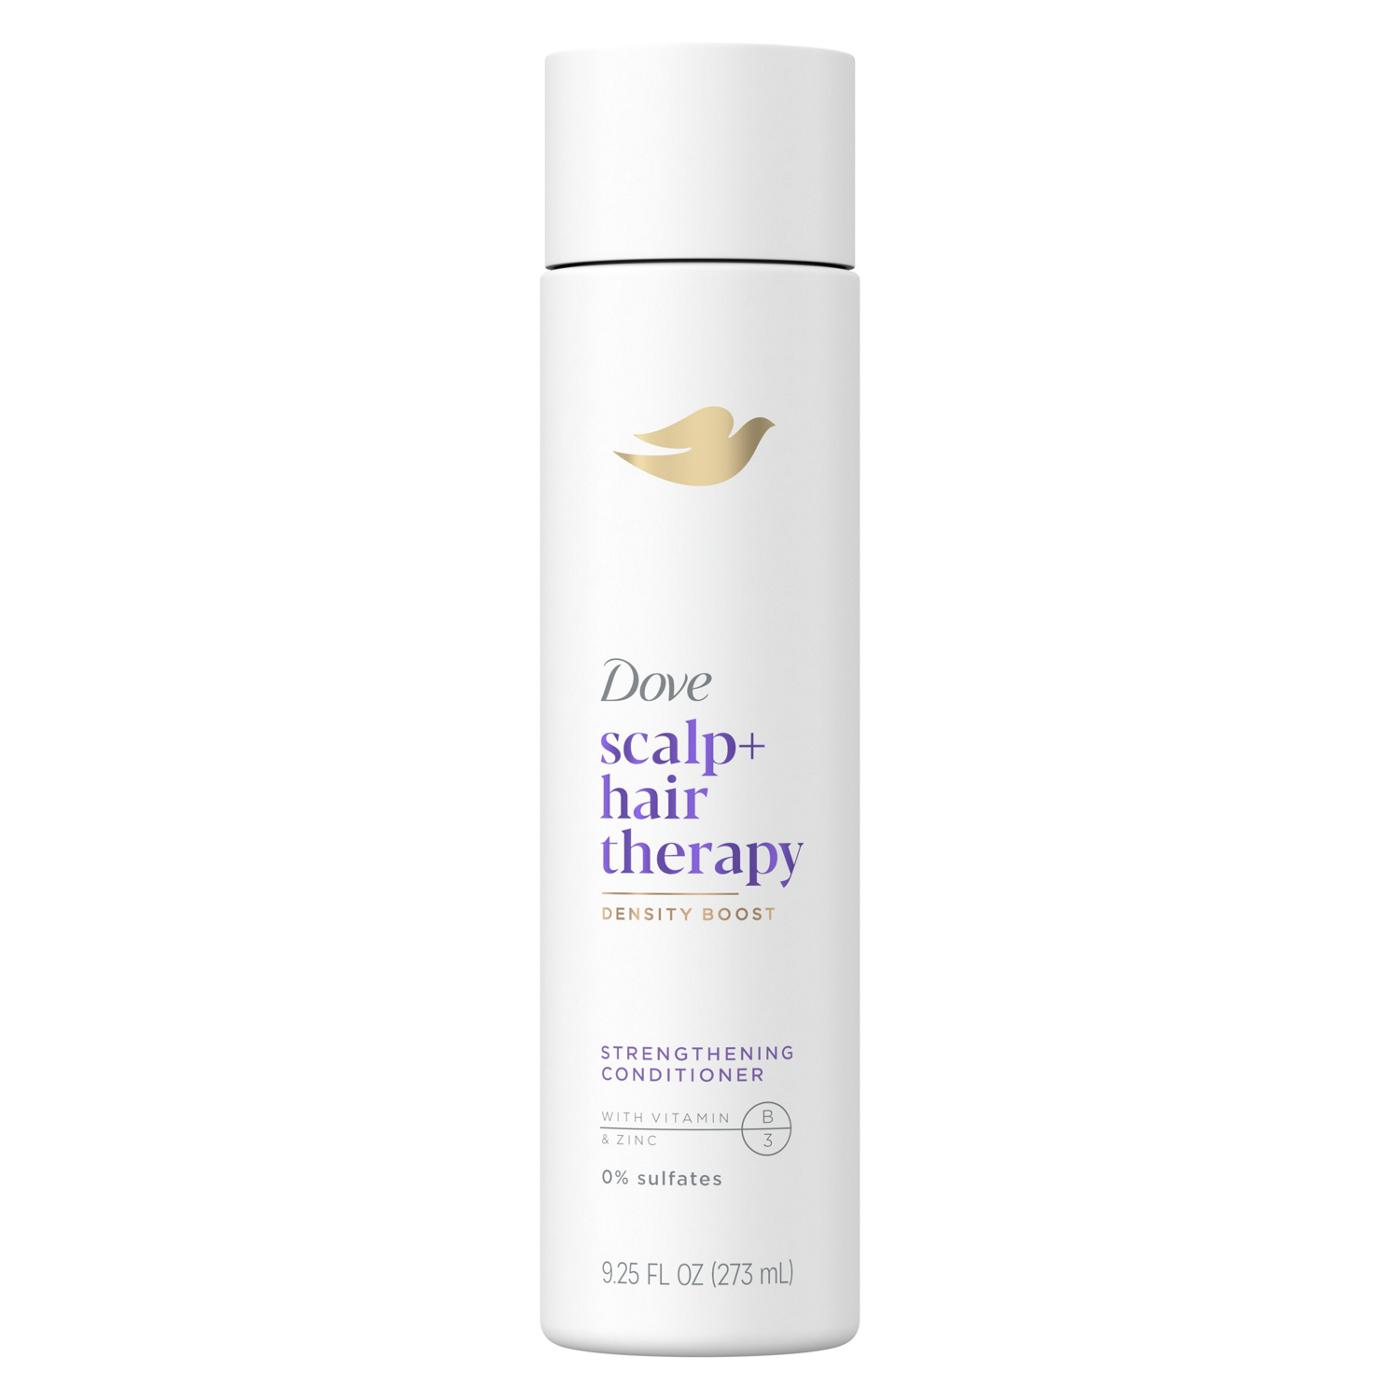 Dove Scalp+ Hair Therapy Strengthening Conditioner; image 1 of 5